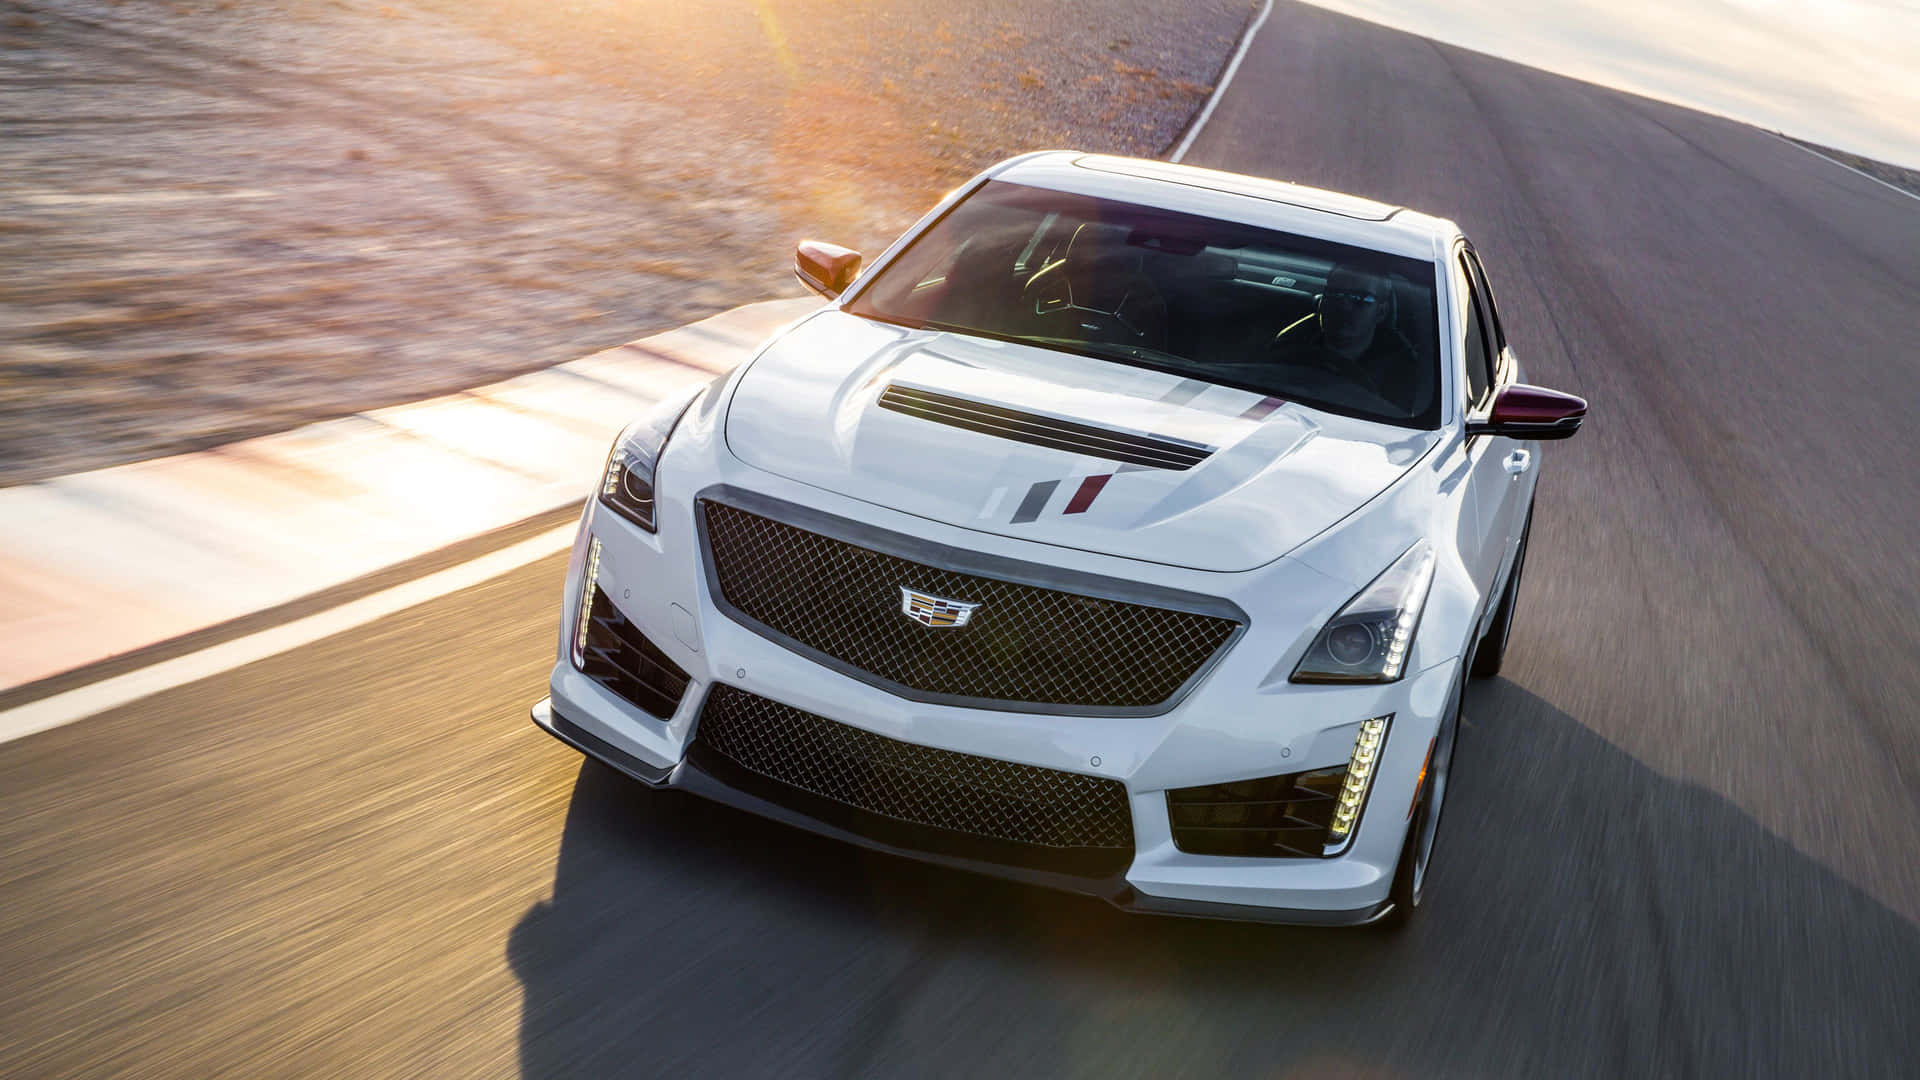 Stunning Cadillac CTS in high-resolution Wallpaper